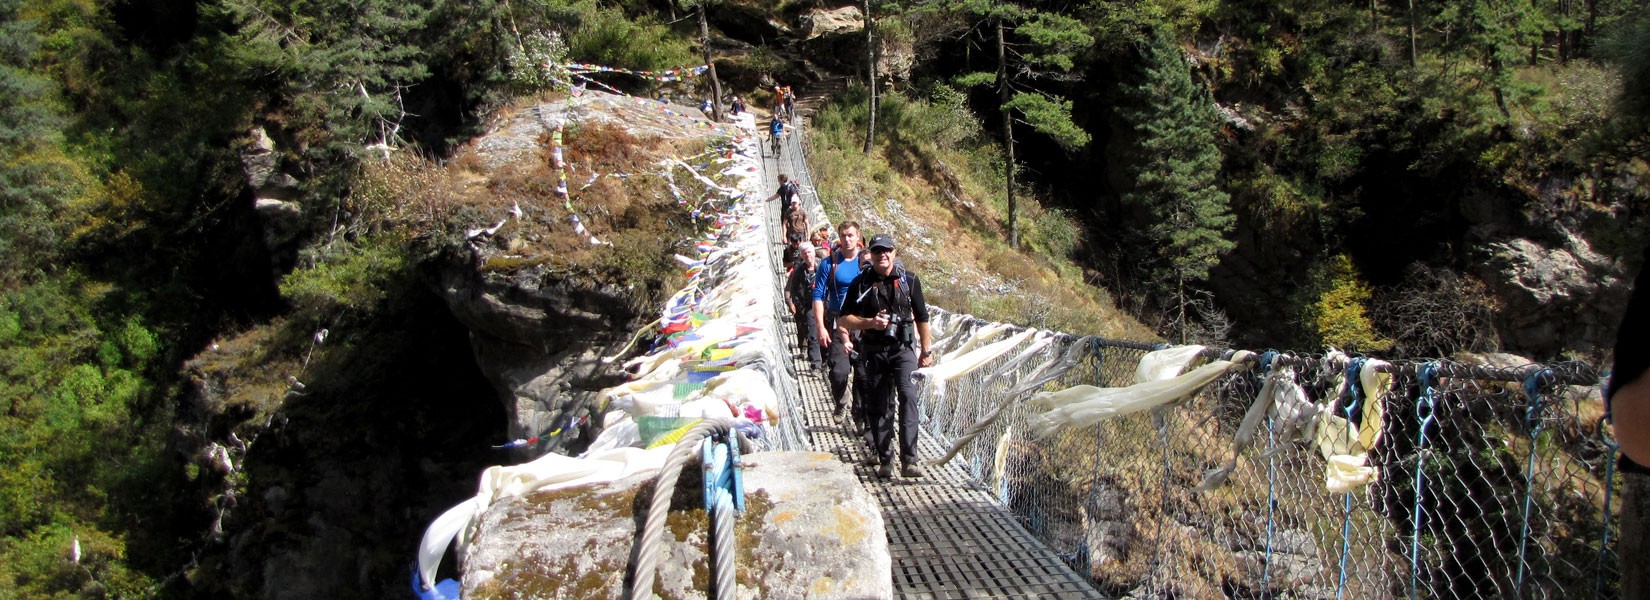 A suspension bridge to Namche Bazaar on way to Everest Base Camp route